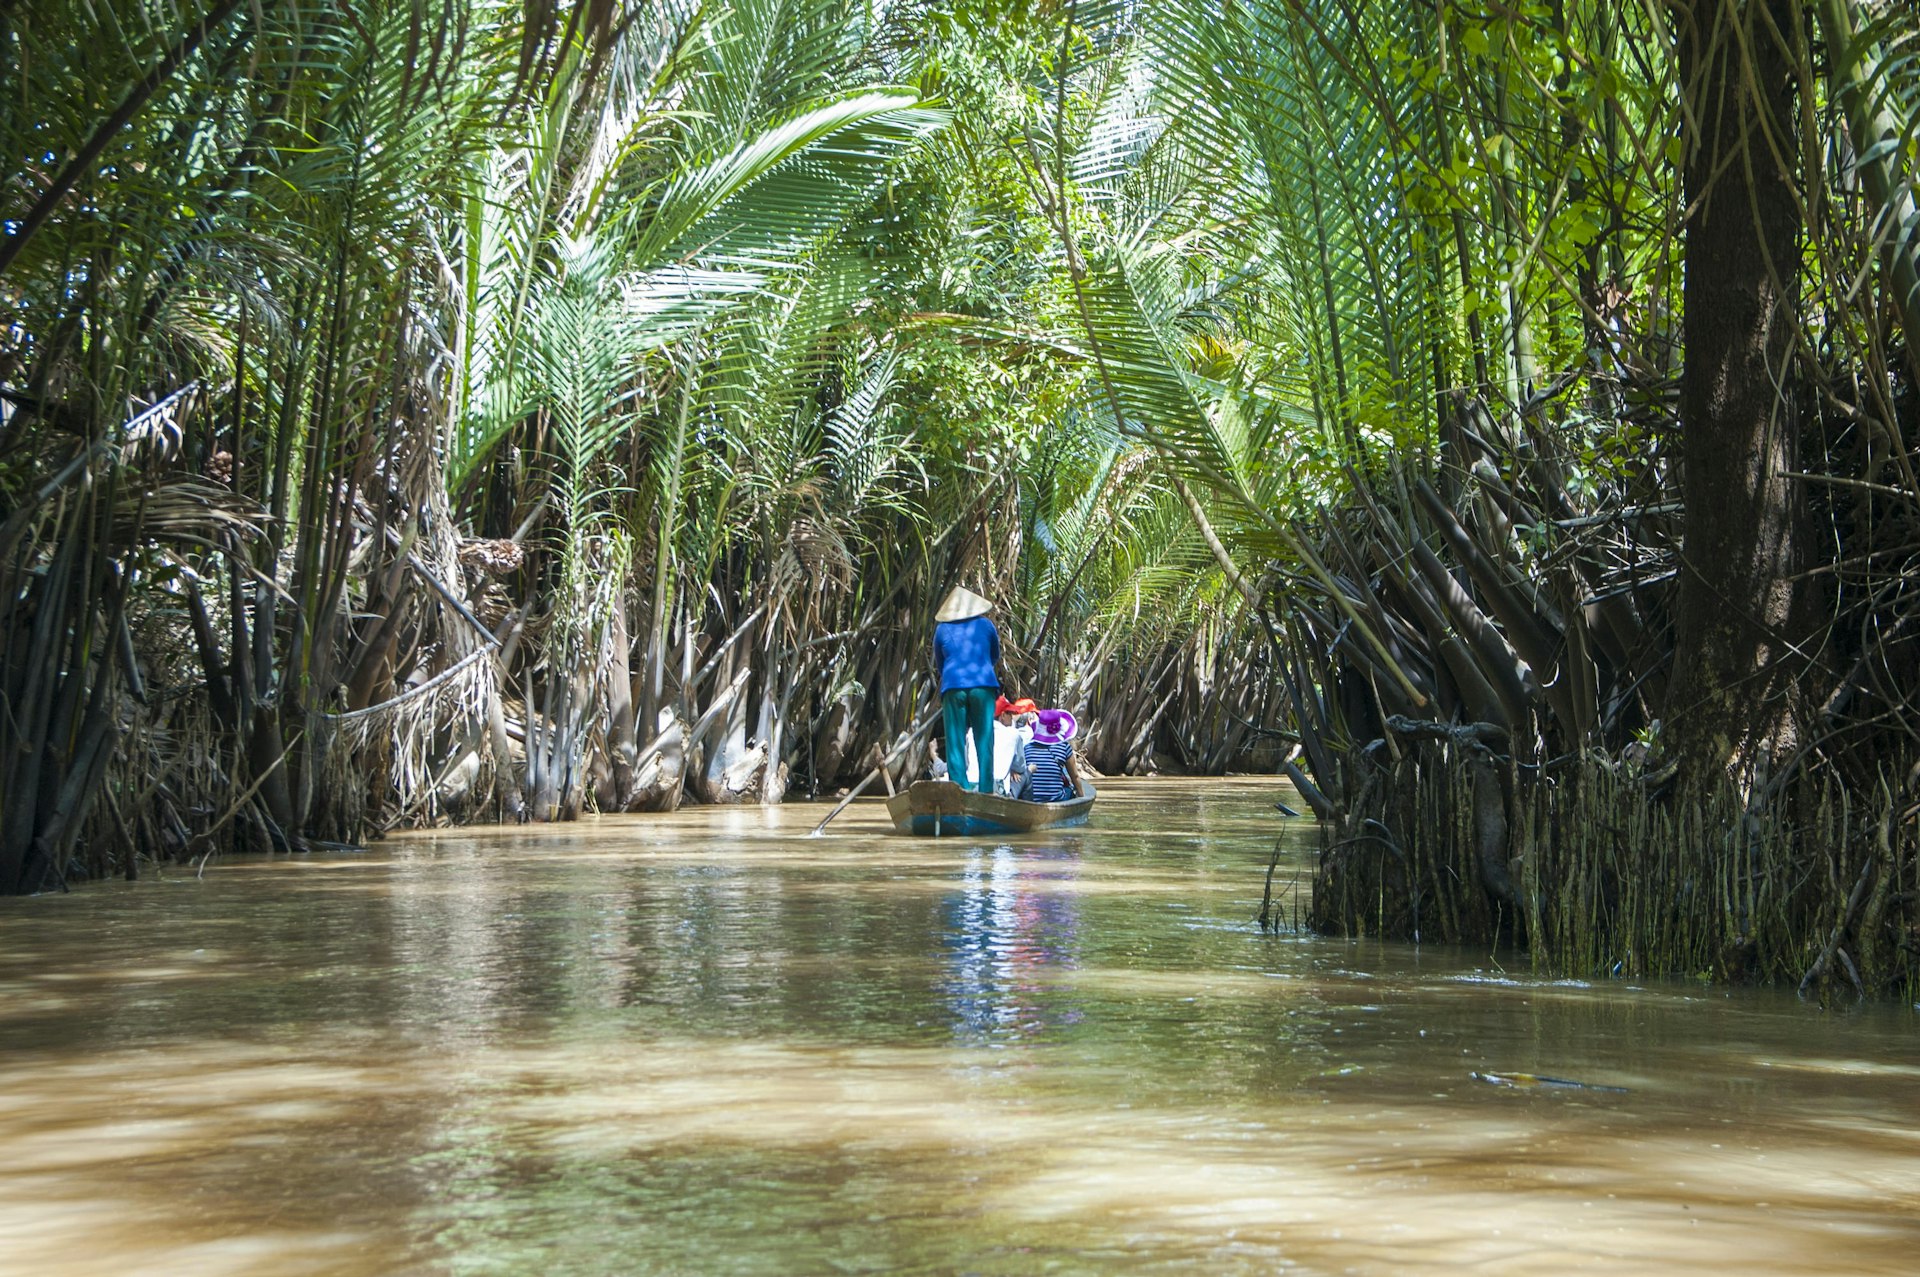 A small boat is being steered along a waterway by a person wearing a conical hat. Trees have grown over the water to form a tunnel 